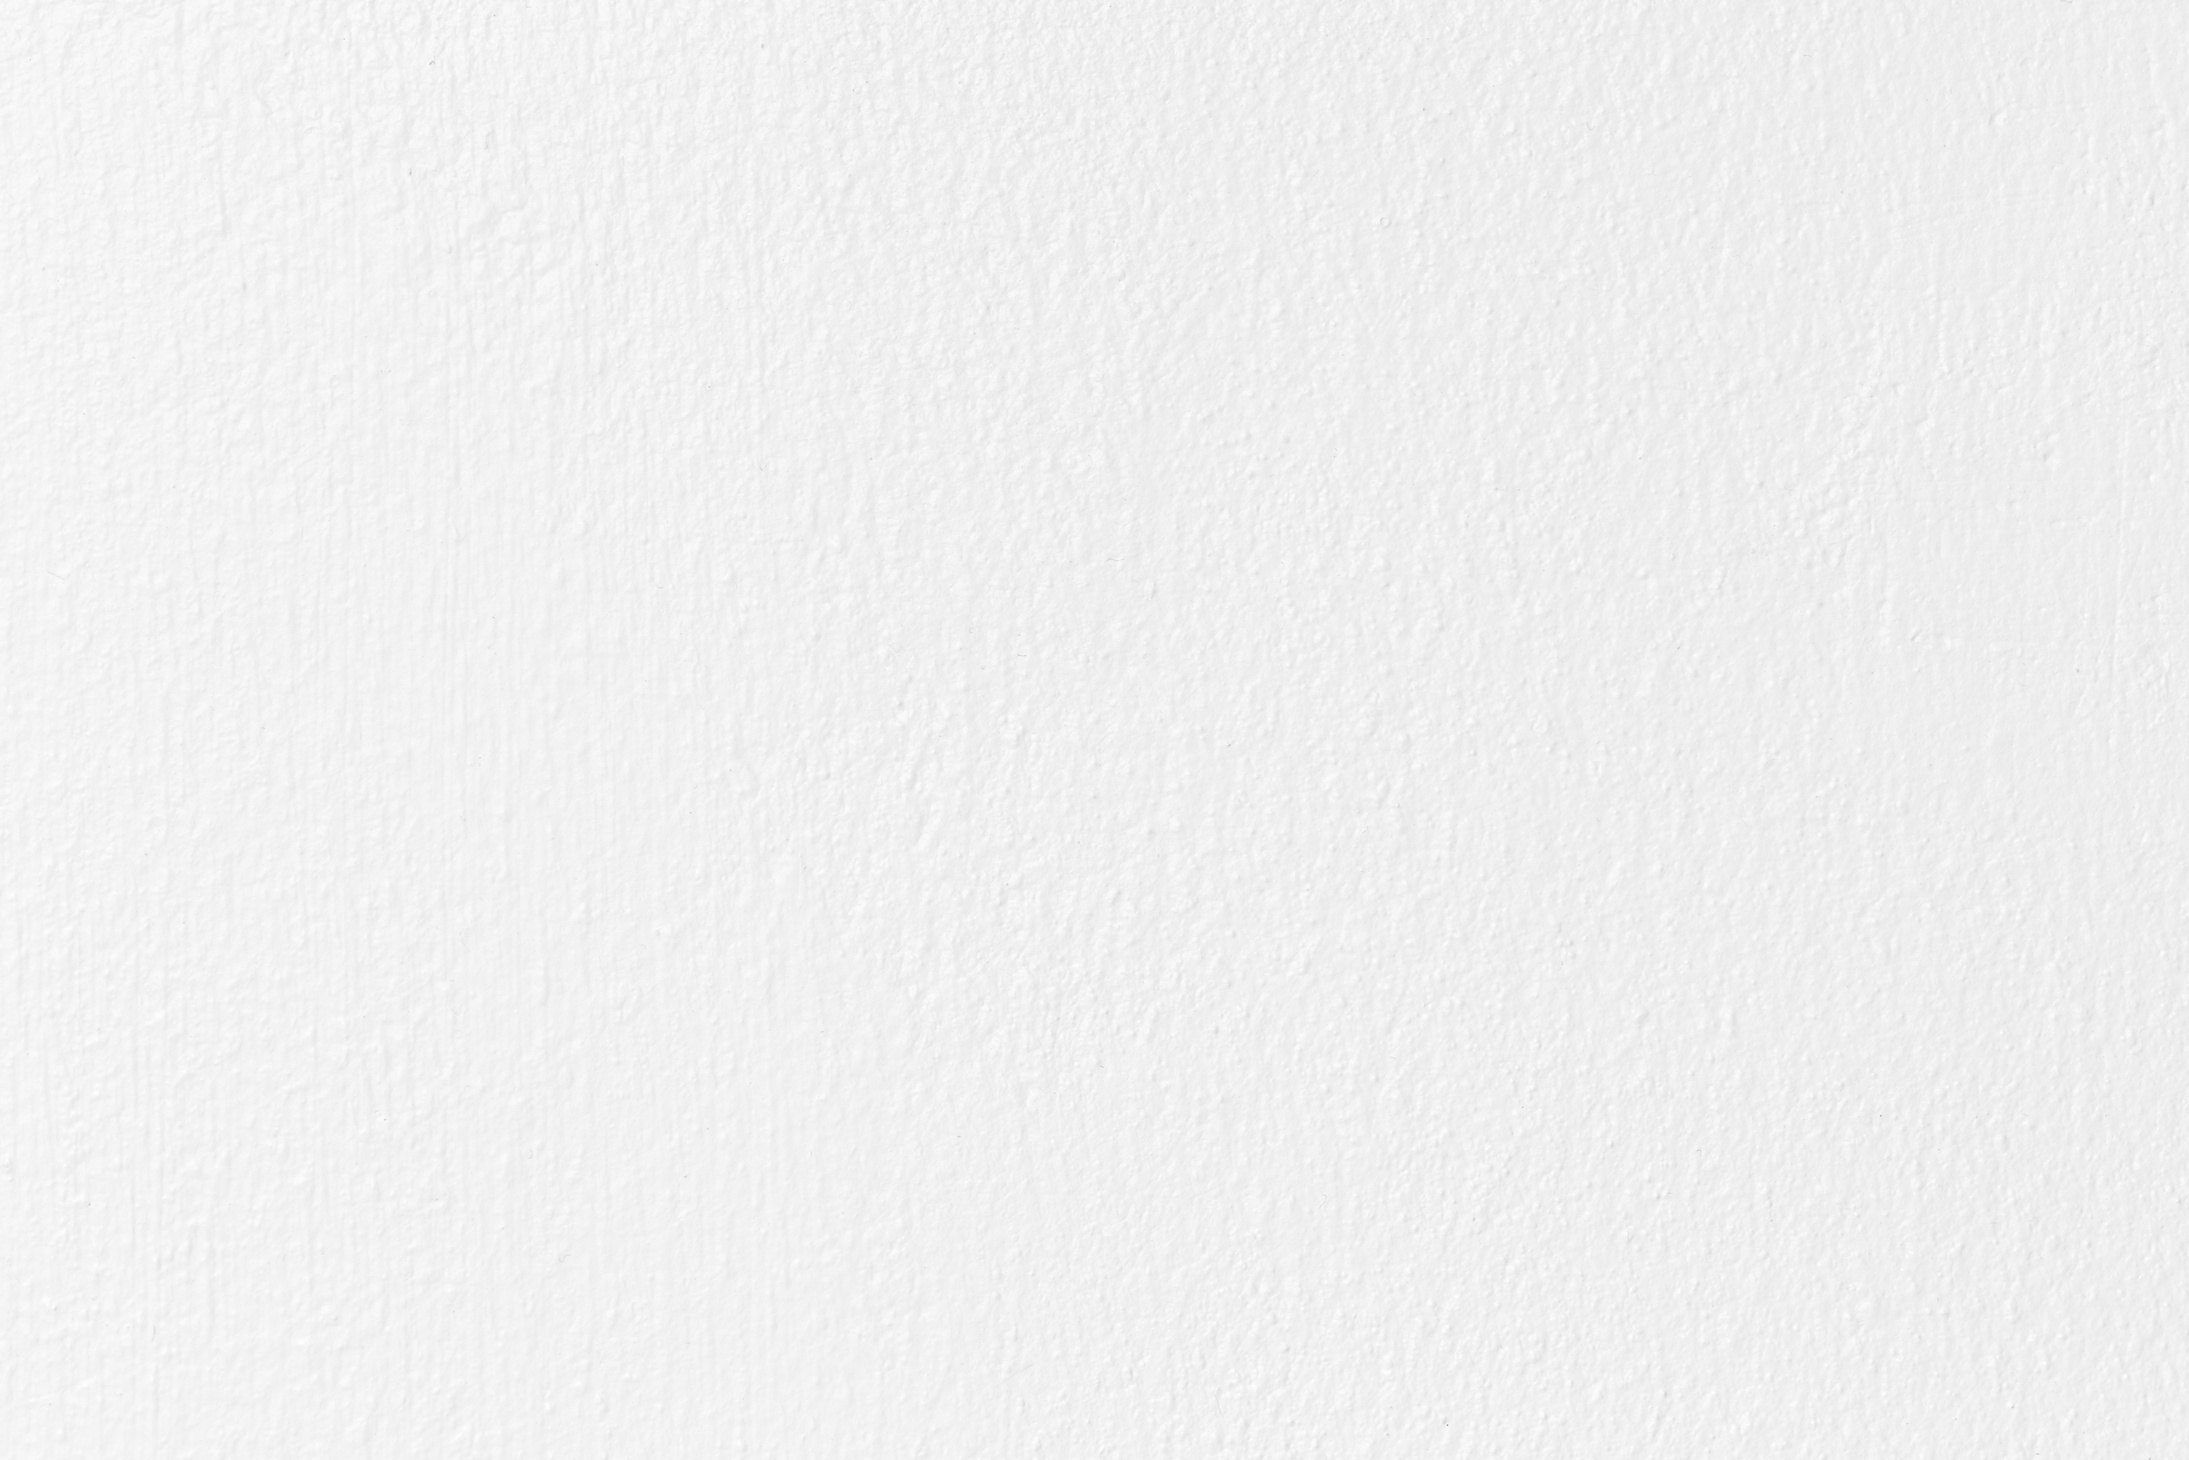 Texture of a white wall backgroud